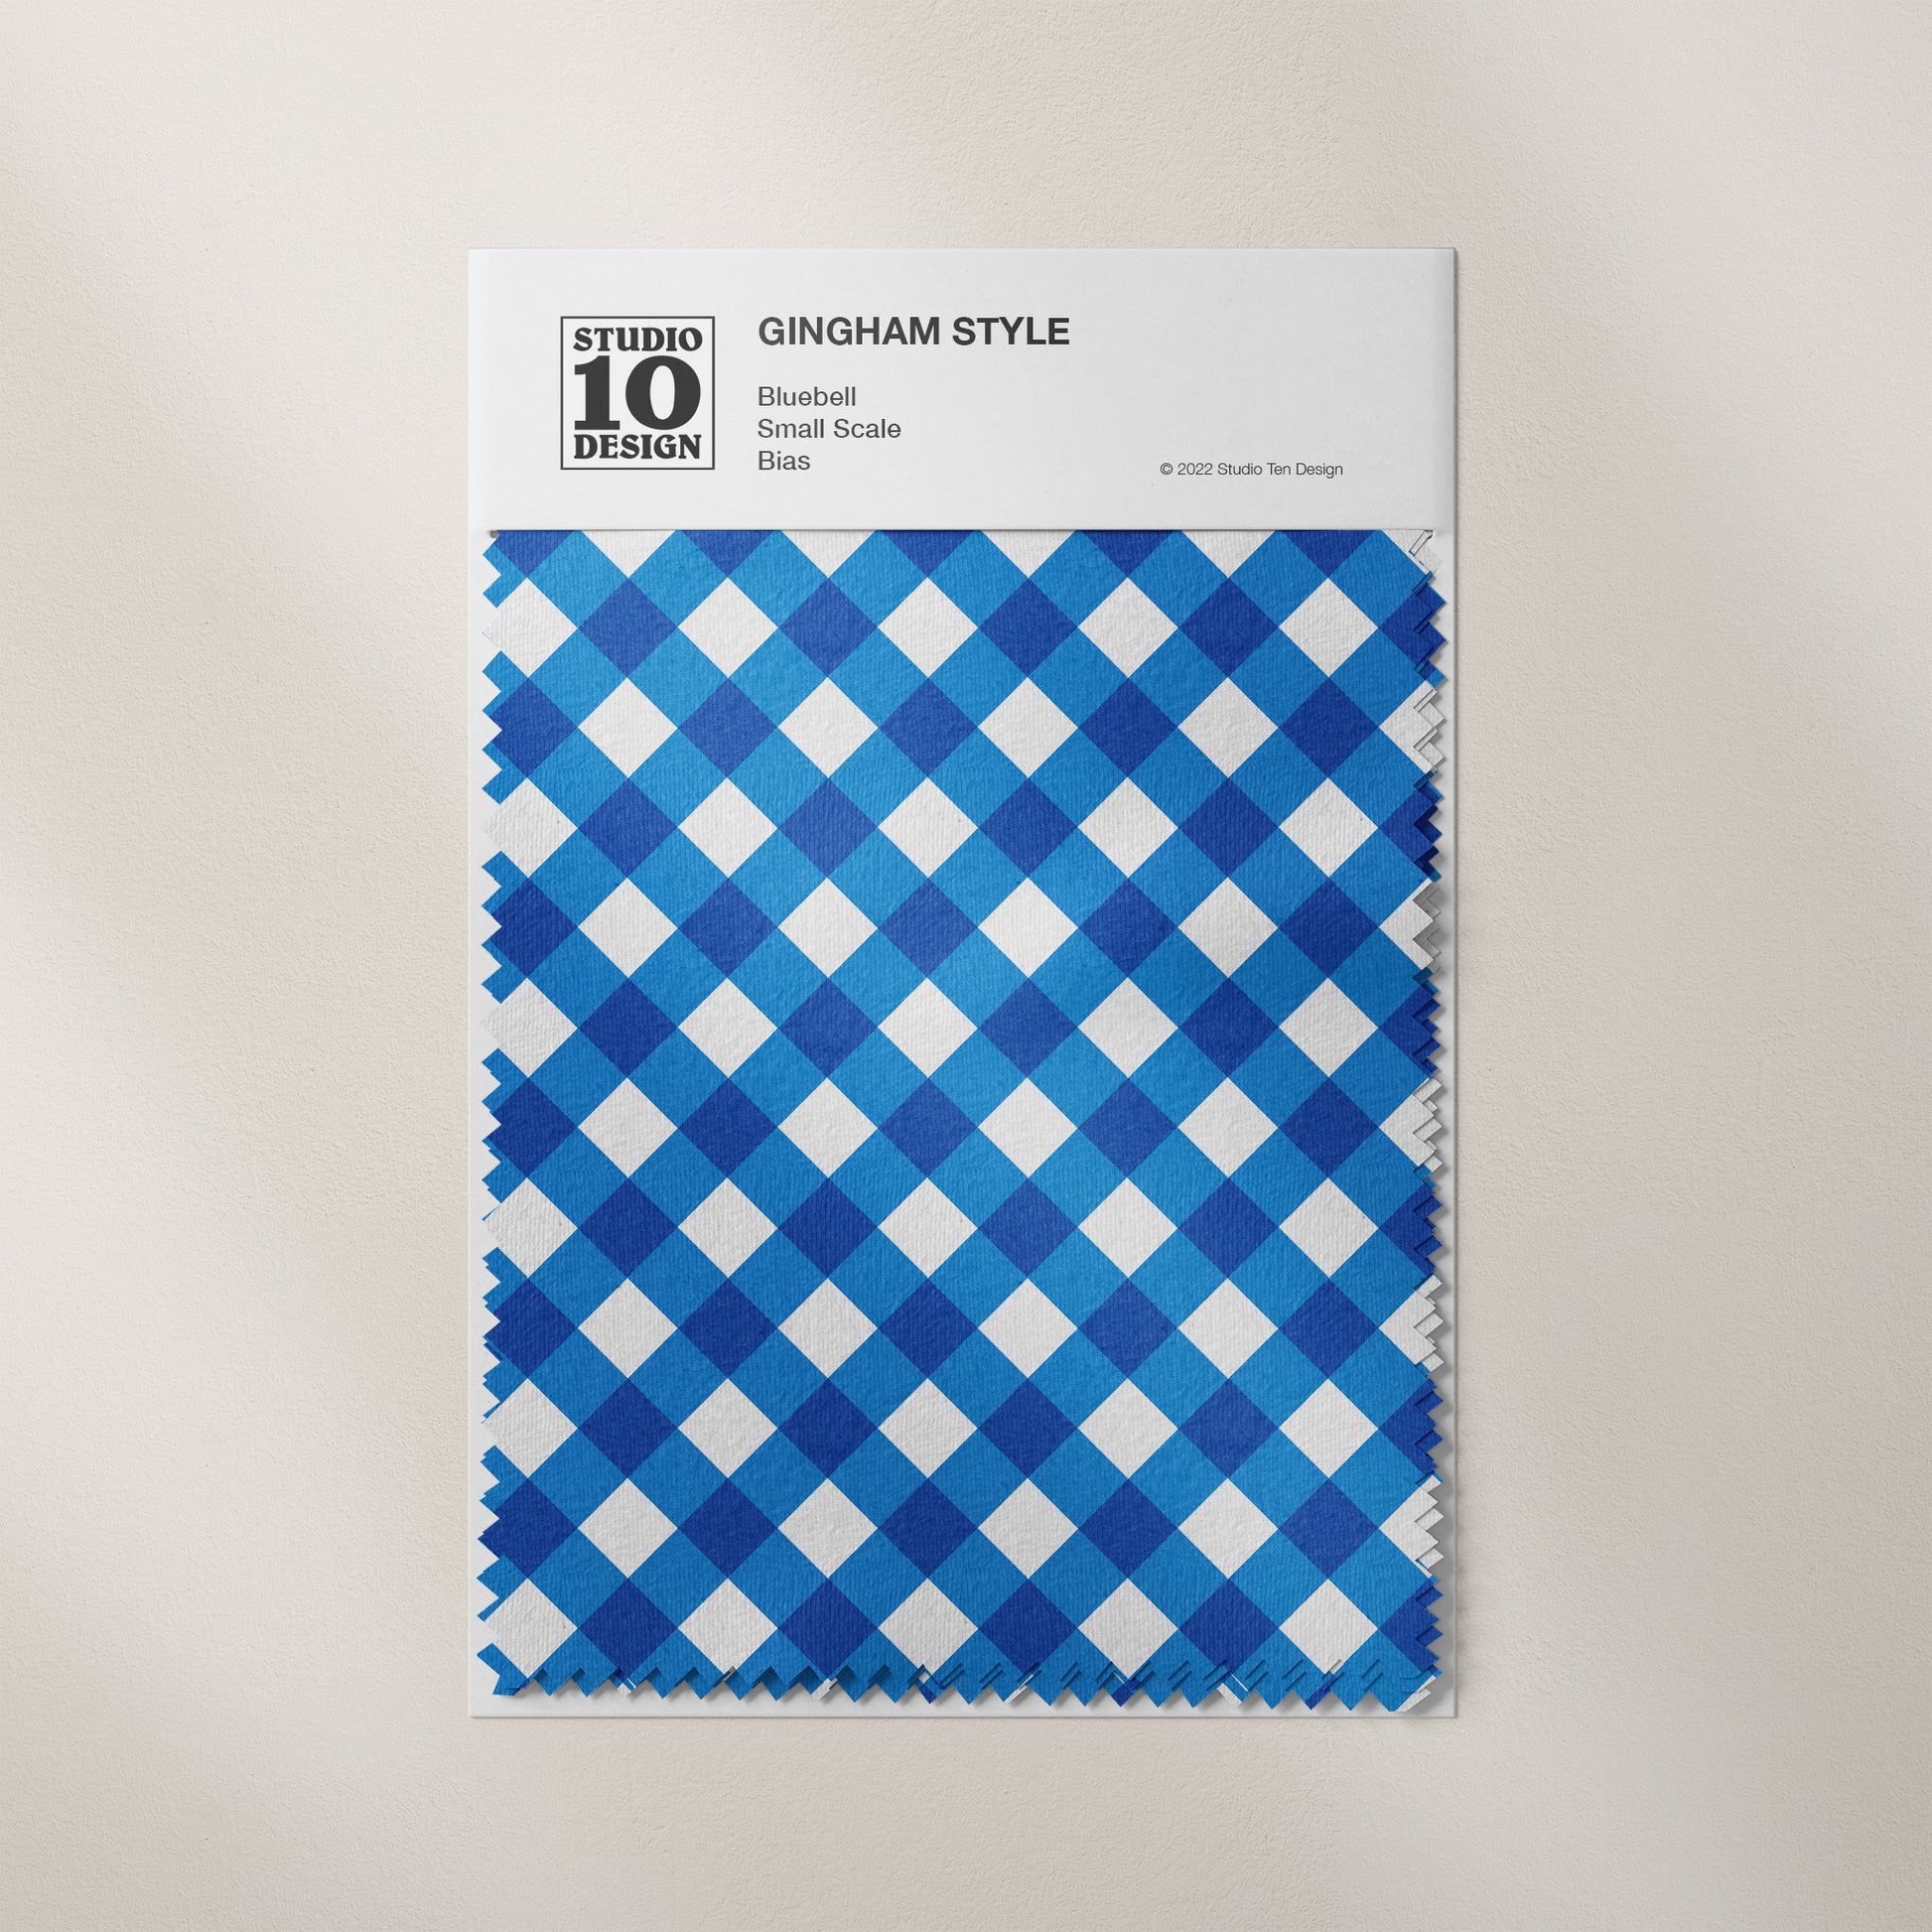 Gingham Style Bluebell Small Bias Printed Fabric by Studio Ten Design